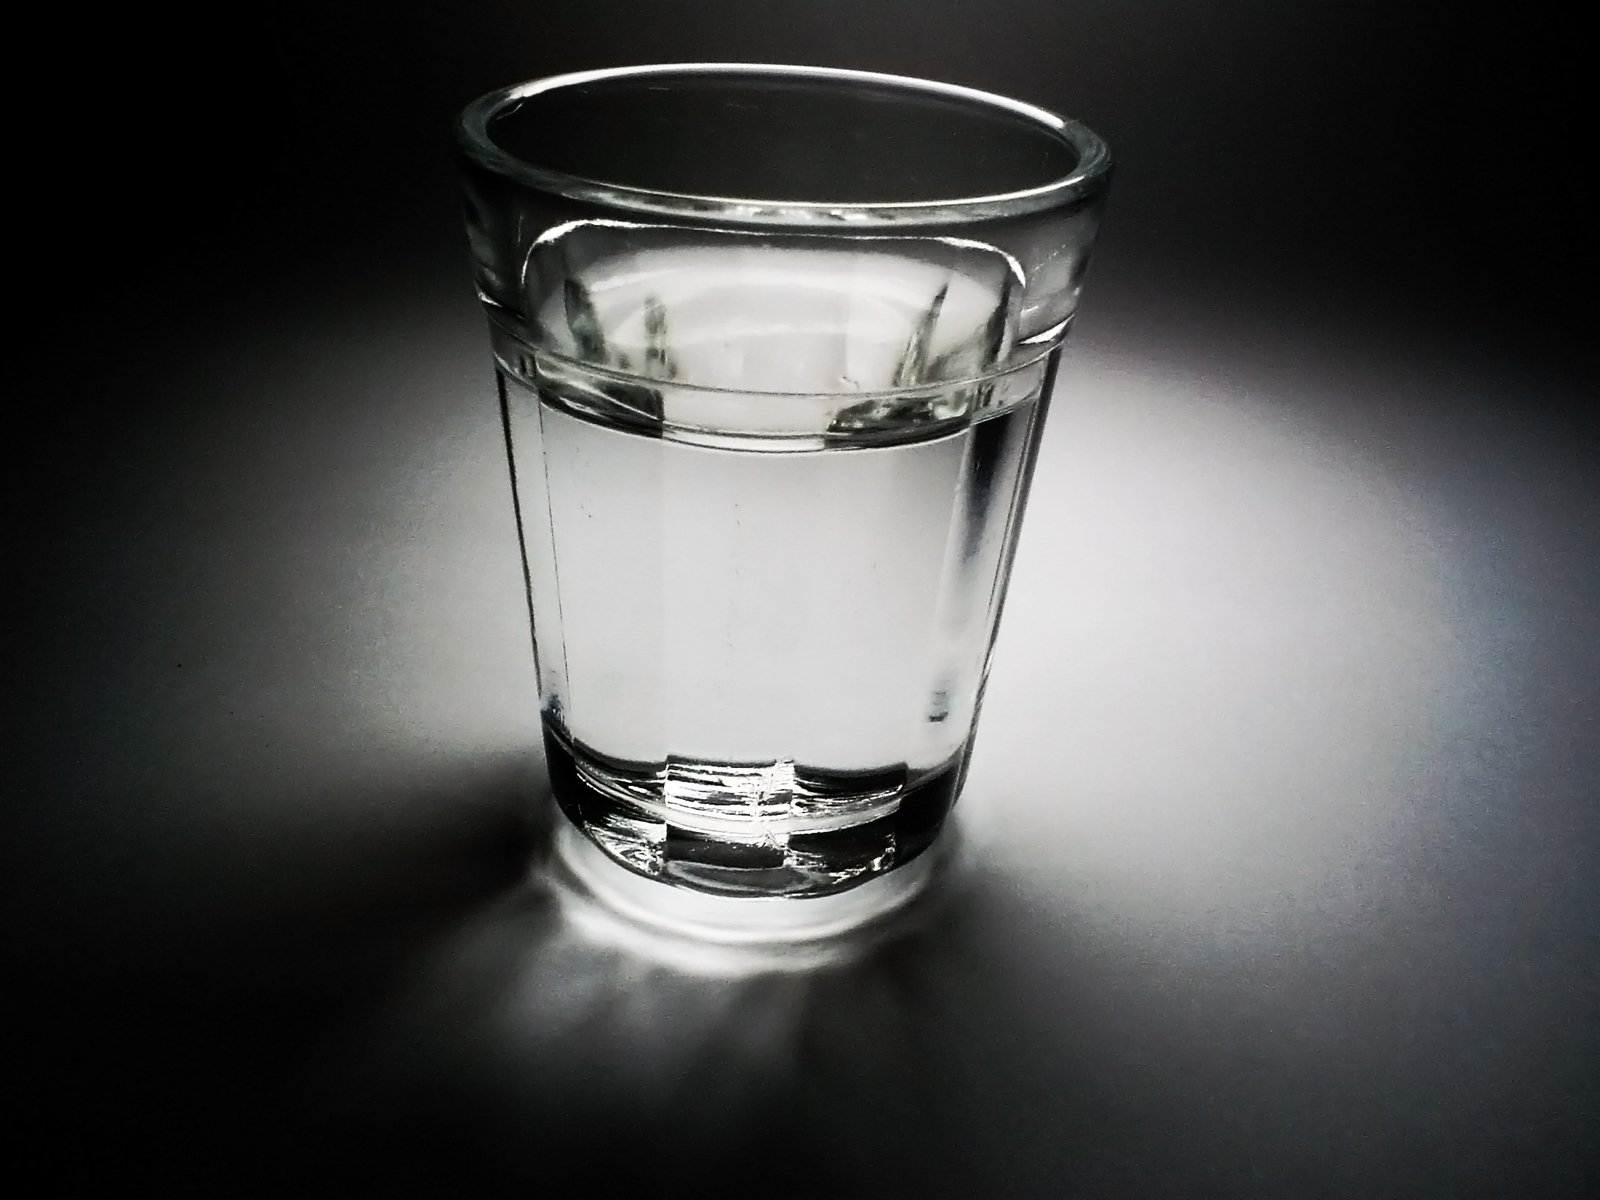 an image of a glass that is empty on a dark background